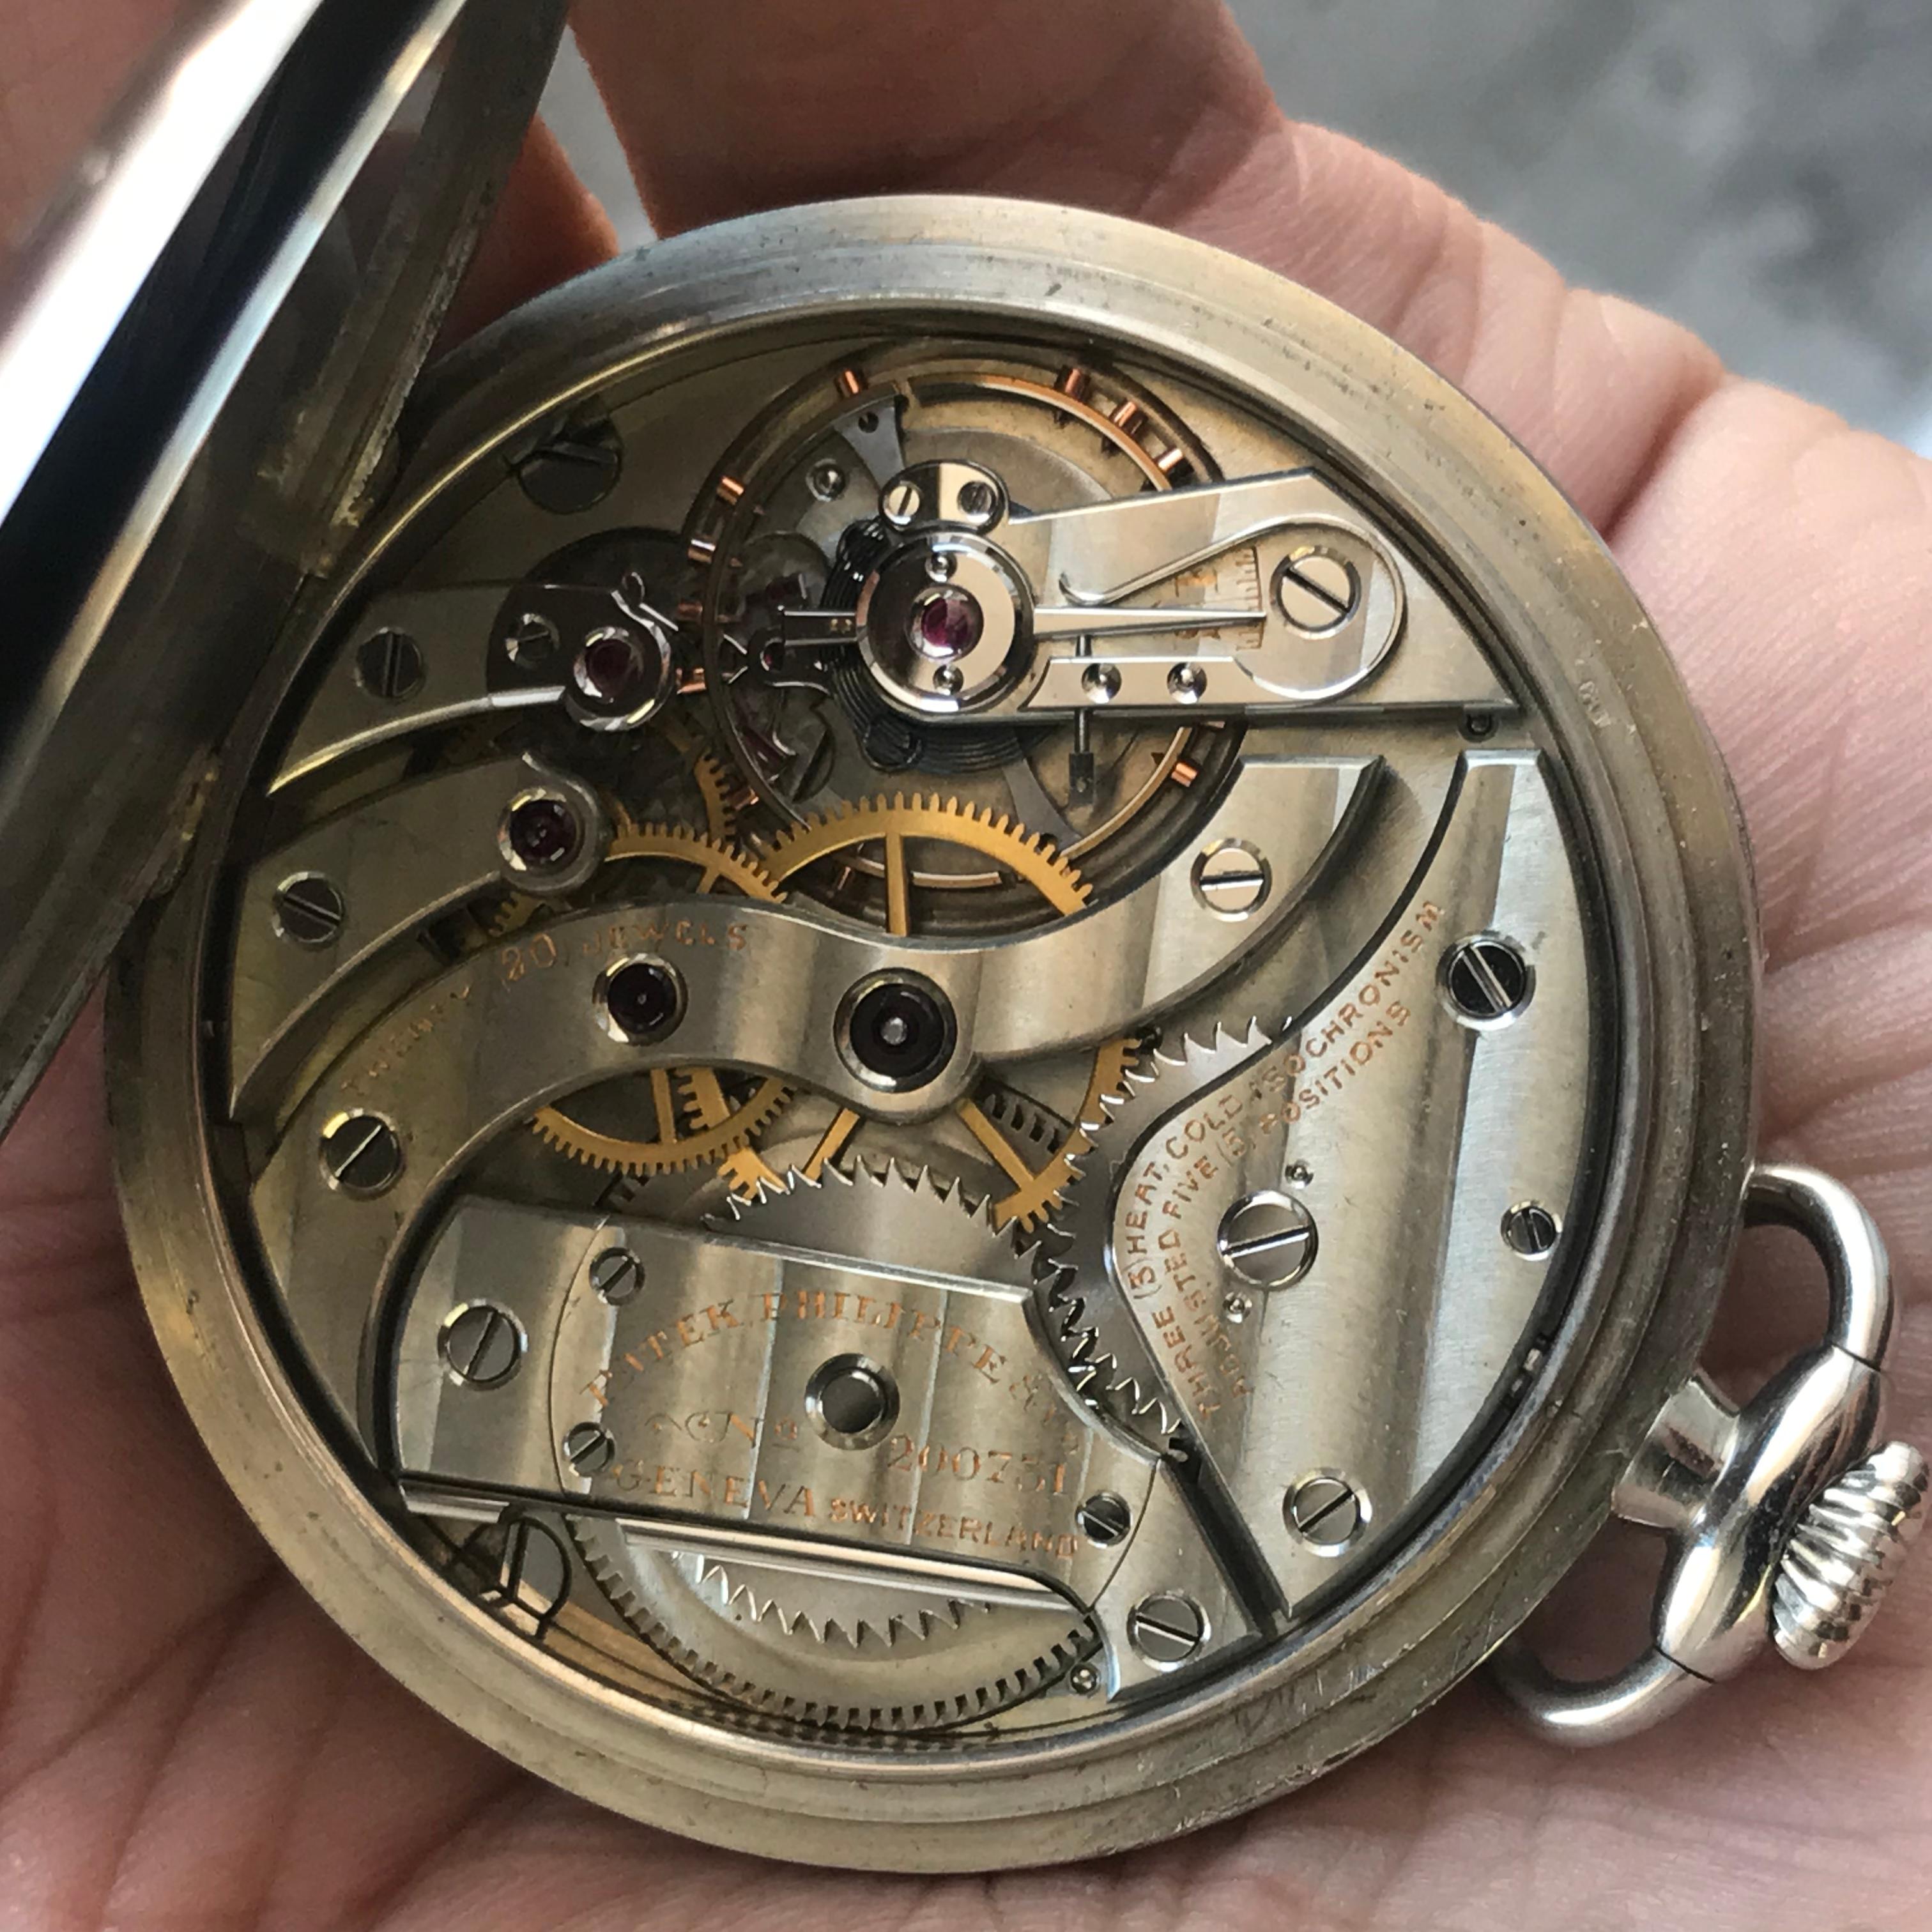 A Very Clean 6x Signed Patek Philippe & Co Solid 18k Gold Pocket Watch
Very High Grade 18 Jewel Nickel Movement Is Fully Signed 
Cased In Its Original, Signed & Serialized Factory Case,
Complete With Original Box And Papers, Along With Small Leather